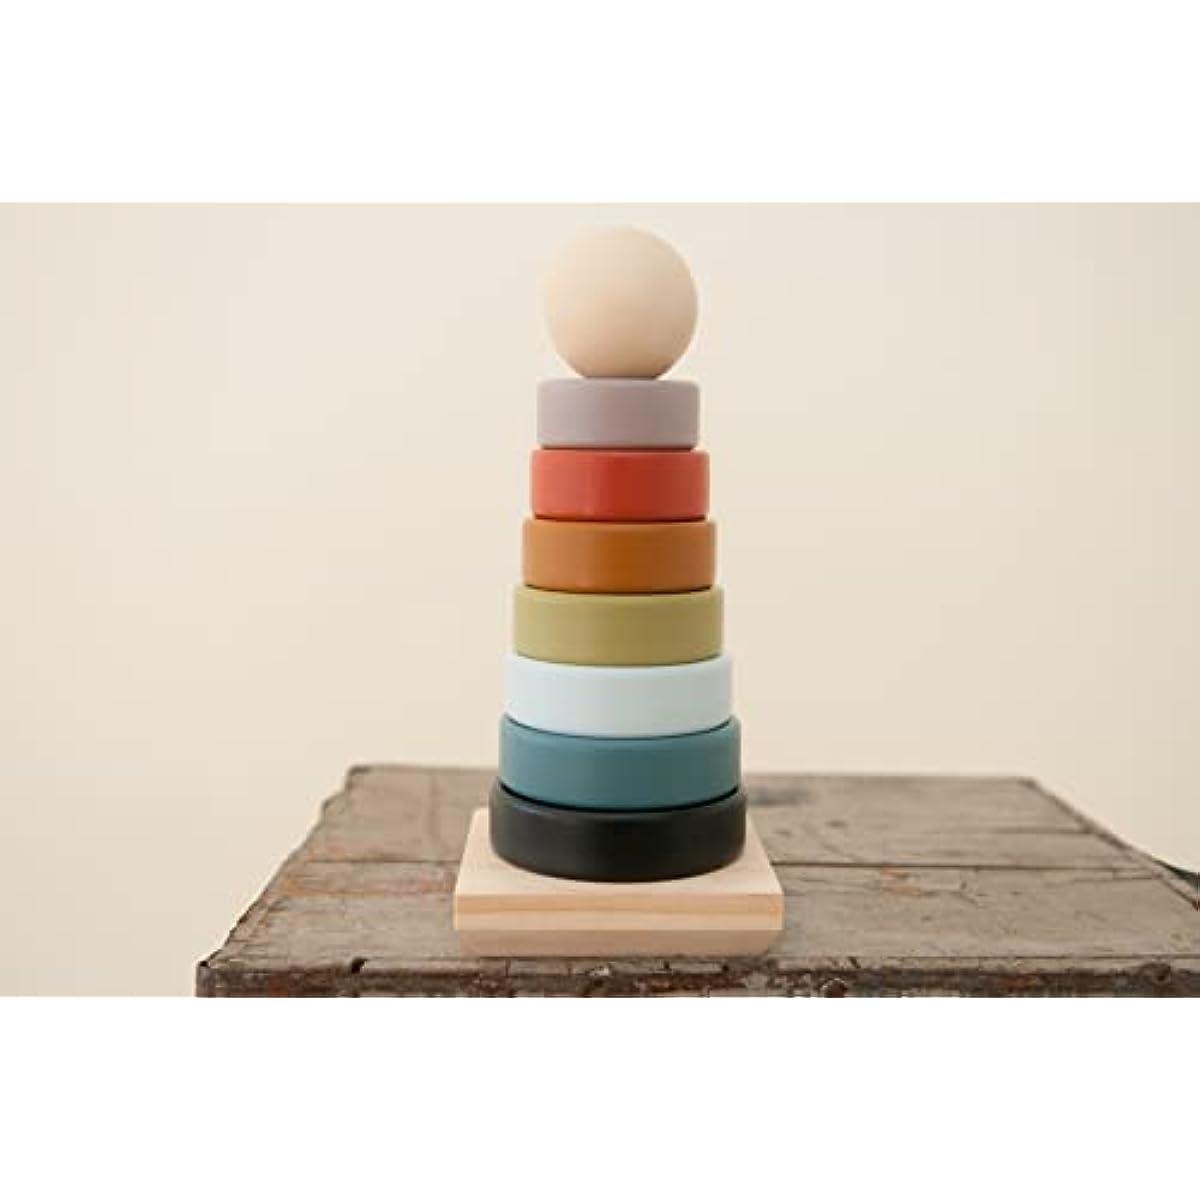 Classic Wooden Ring Stacker Toy - Cykapu